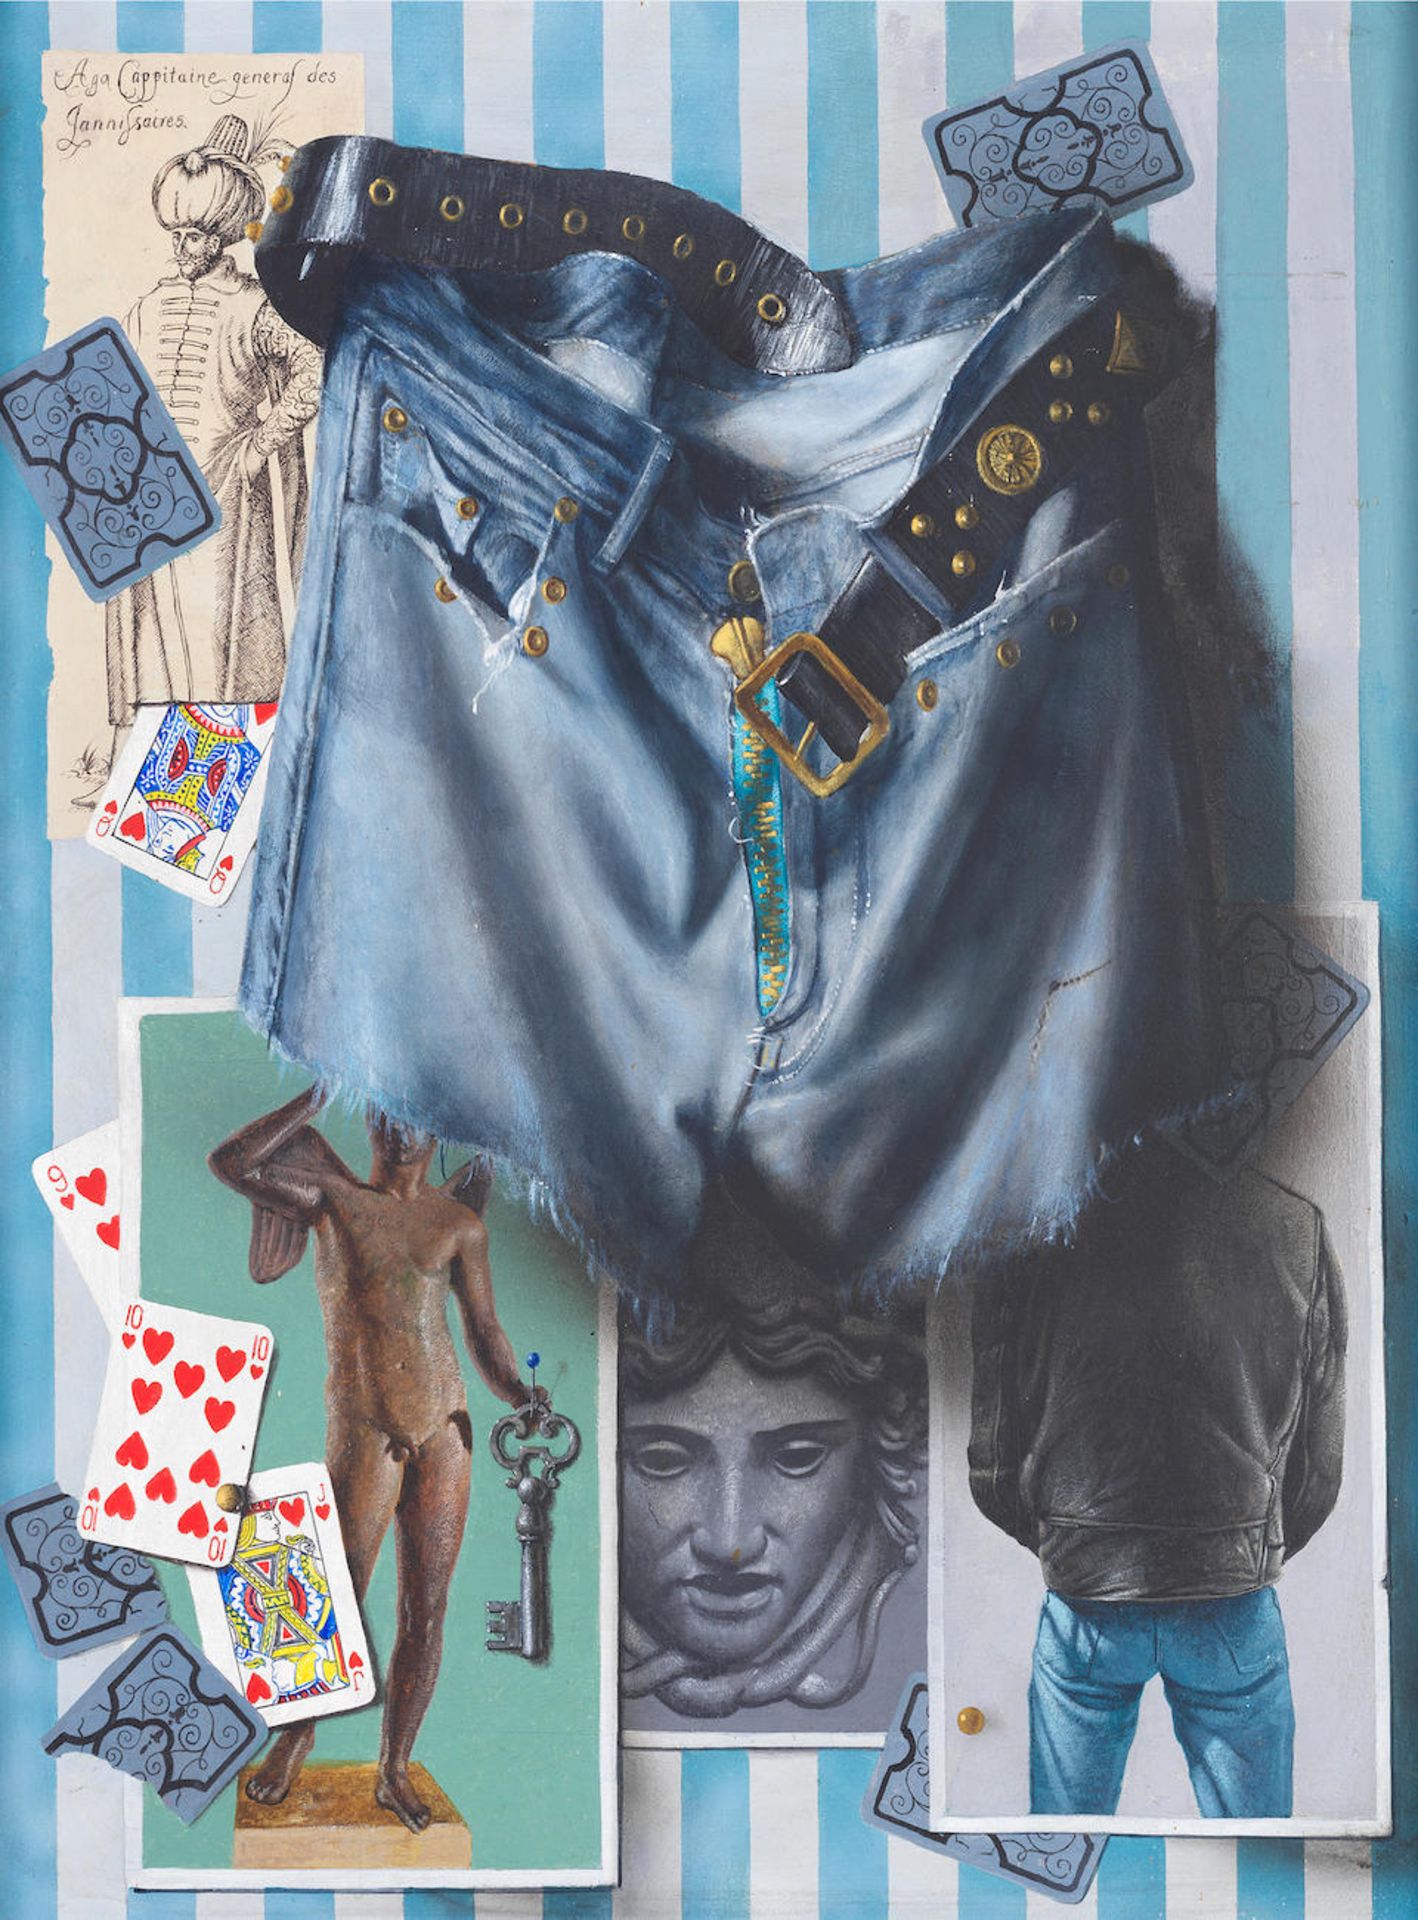 Martin Battersby (British, 1914-1982) Trompe l'oeil: Playing Cards and Jeans